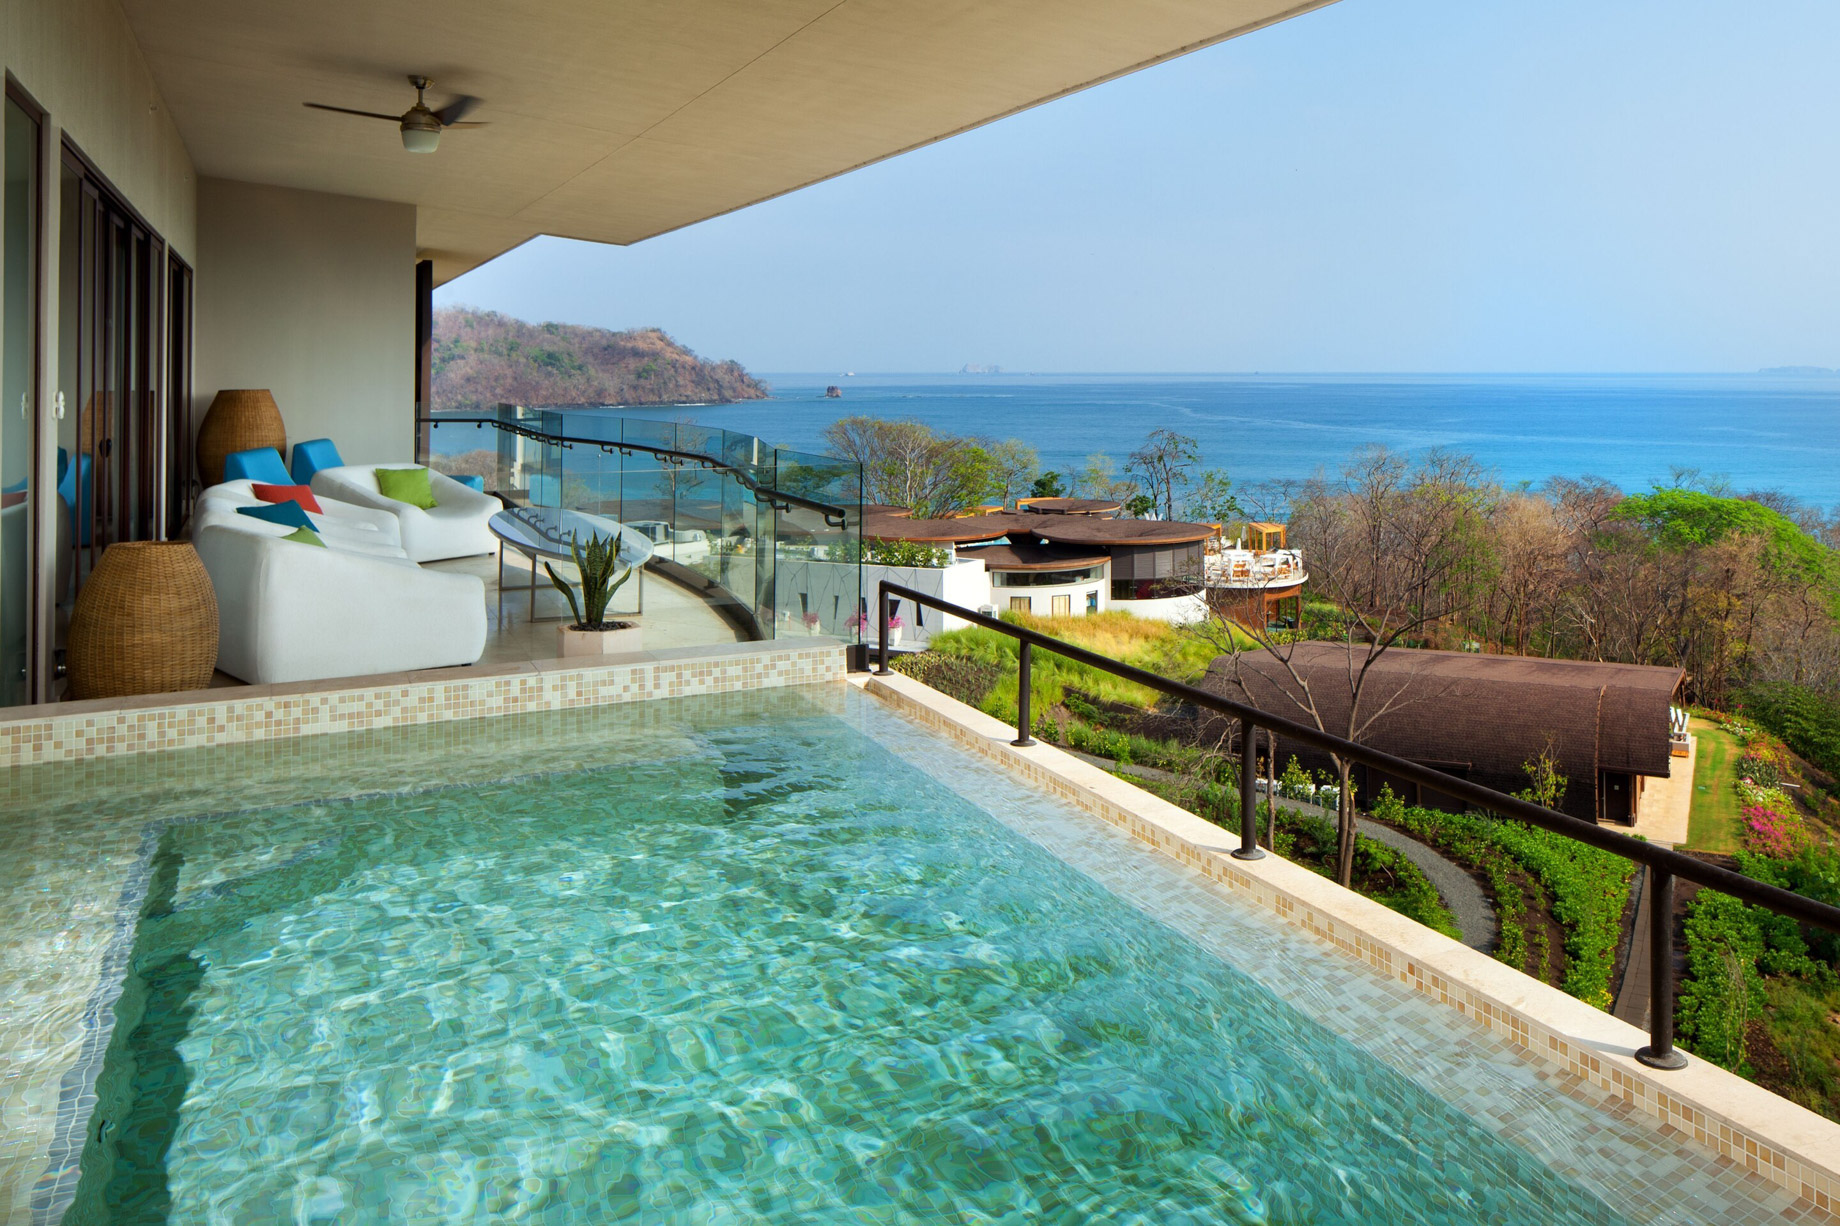 W Costa Rica Reserva Conchal Resort – Costa Rica – Wow Suite Plunge Pool View